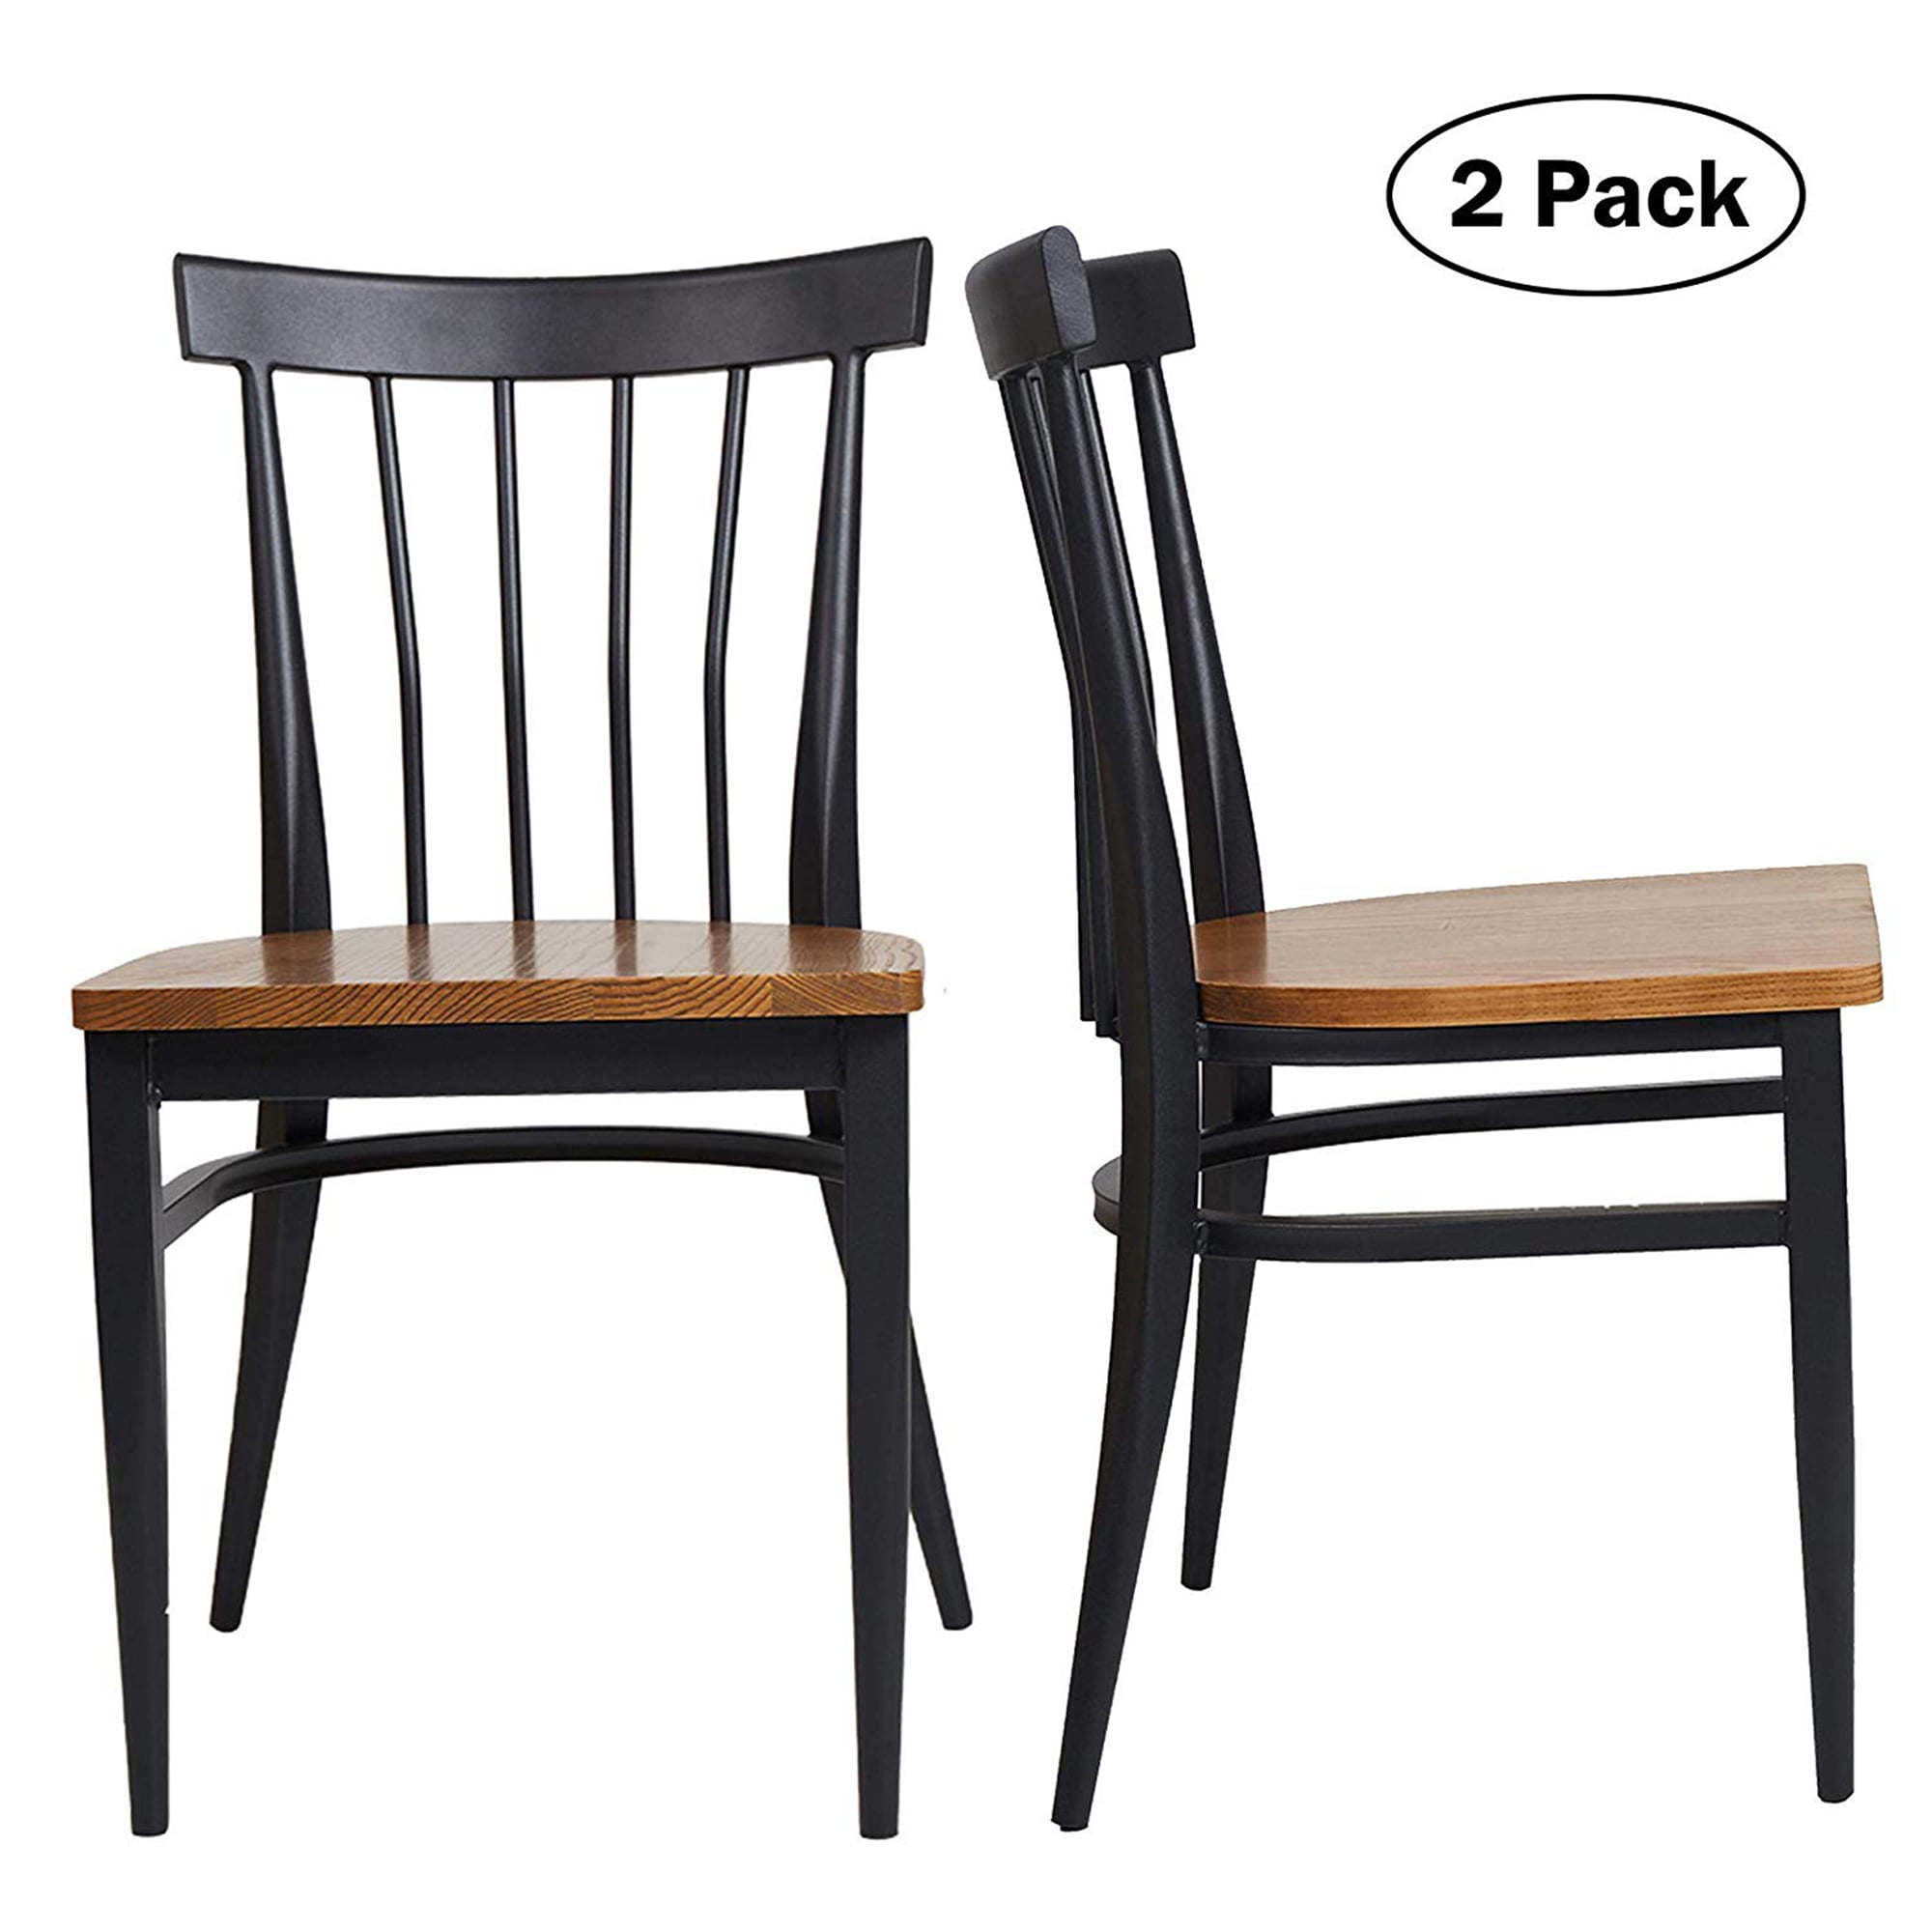 KARMAS PRODUCT Set of 2 Dining Side Chairs - Natural Wood Seat and ...